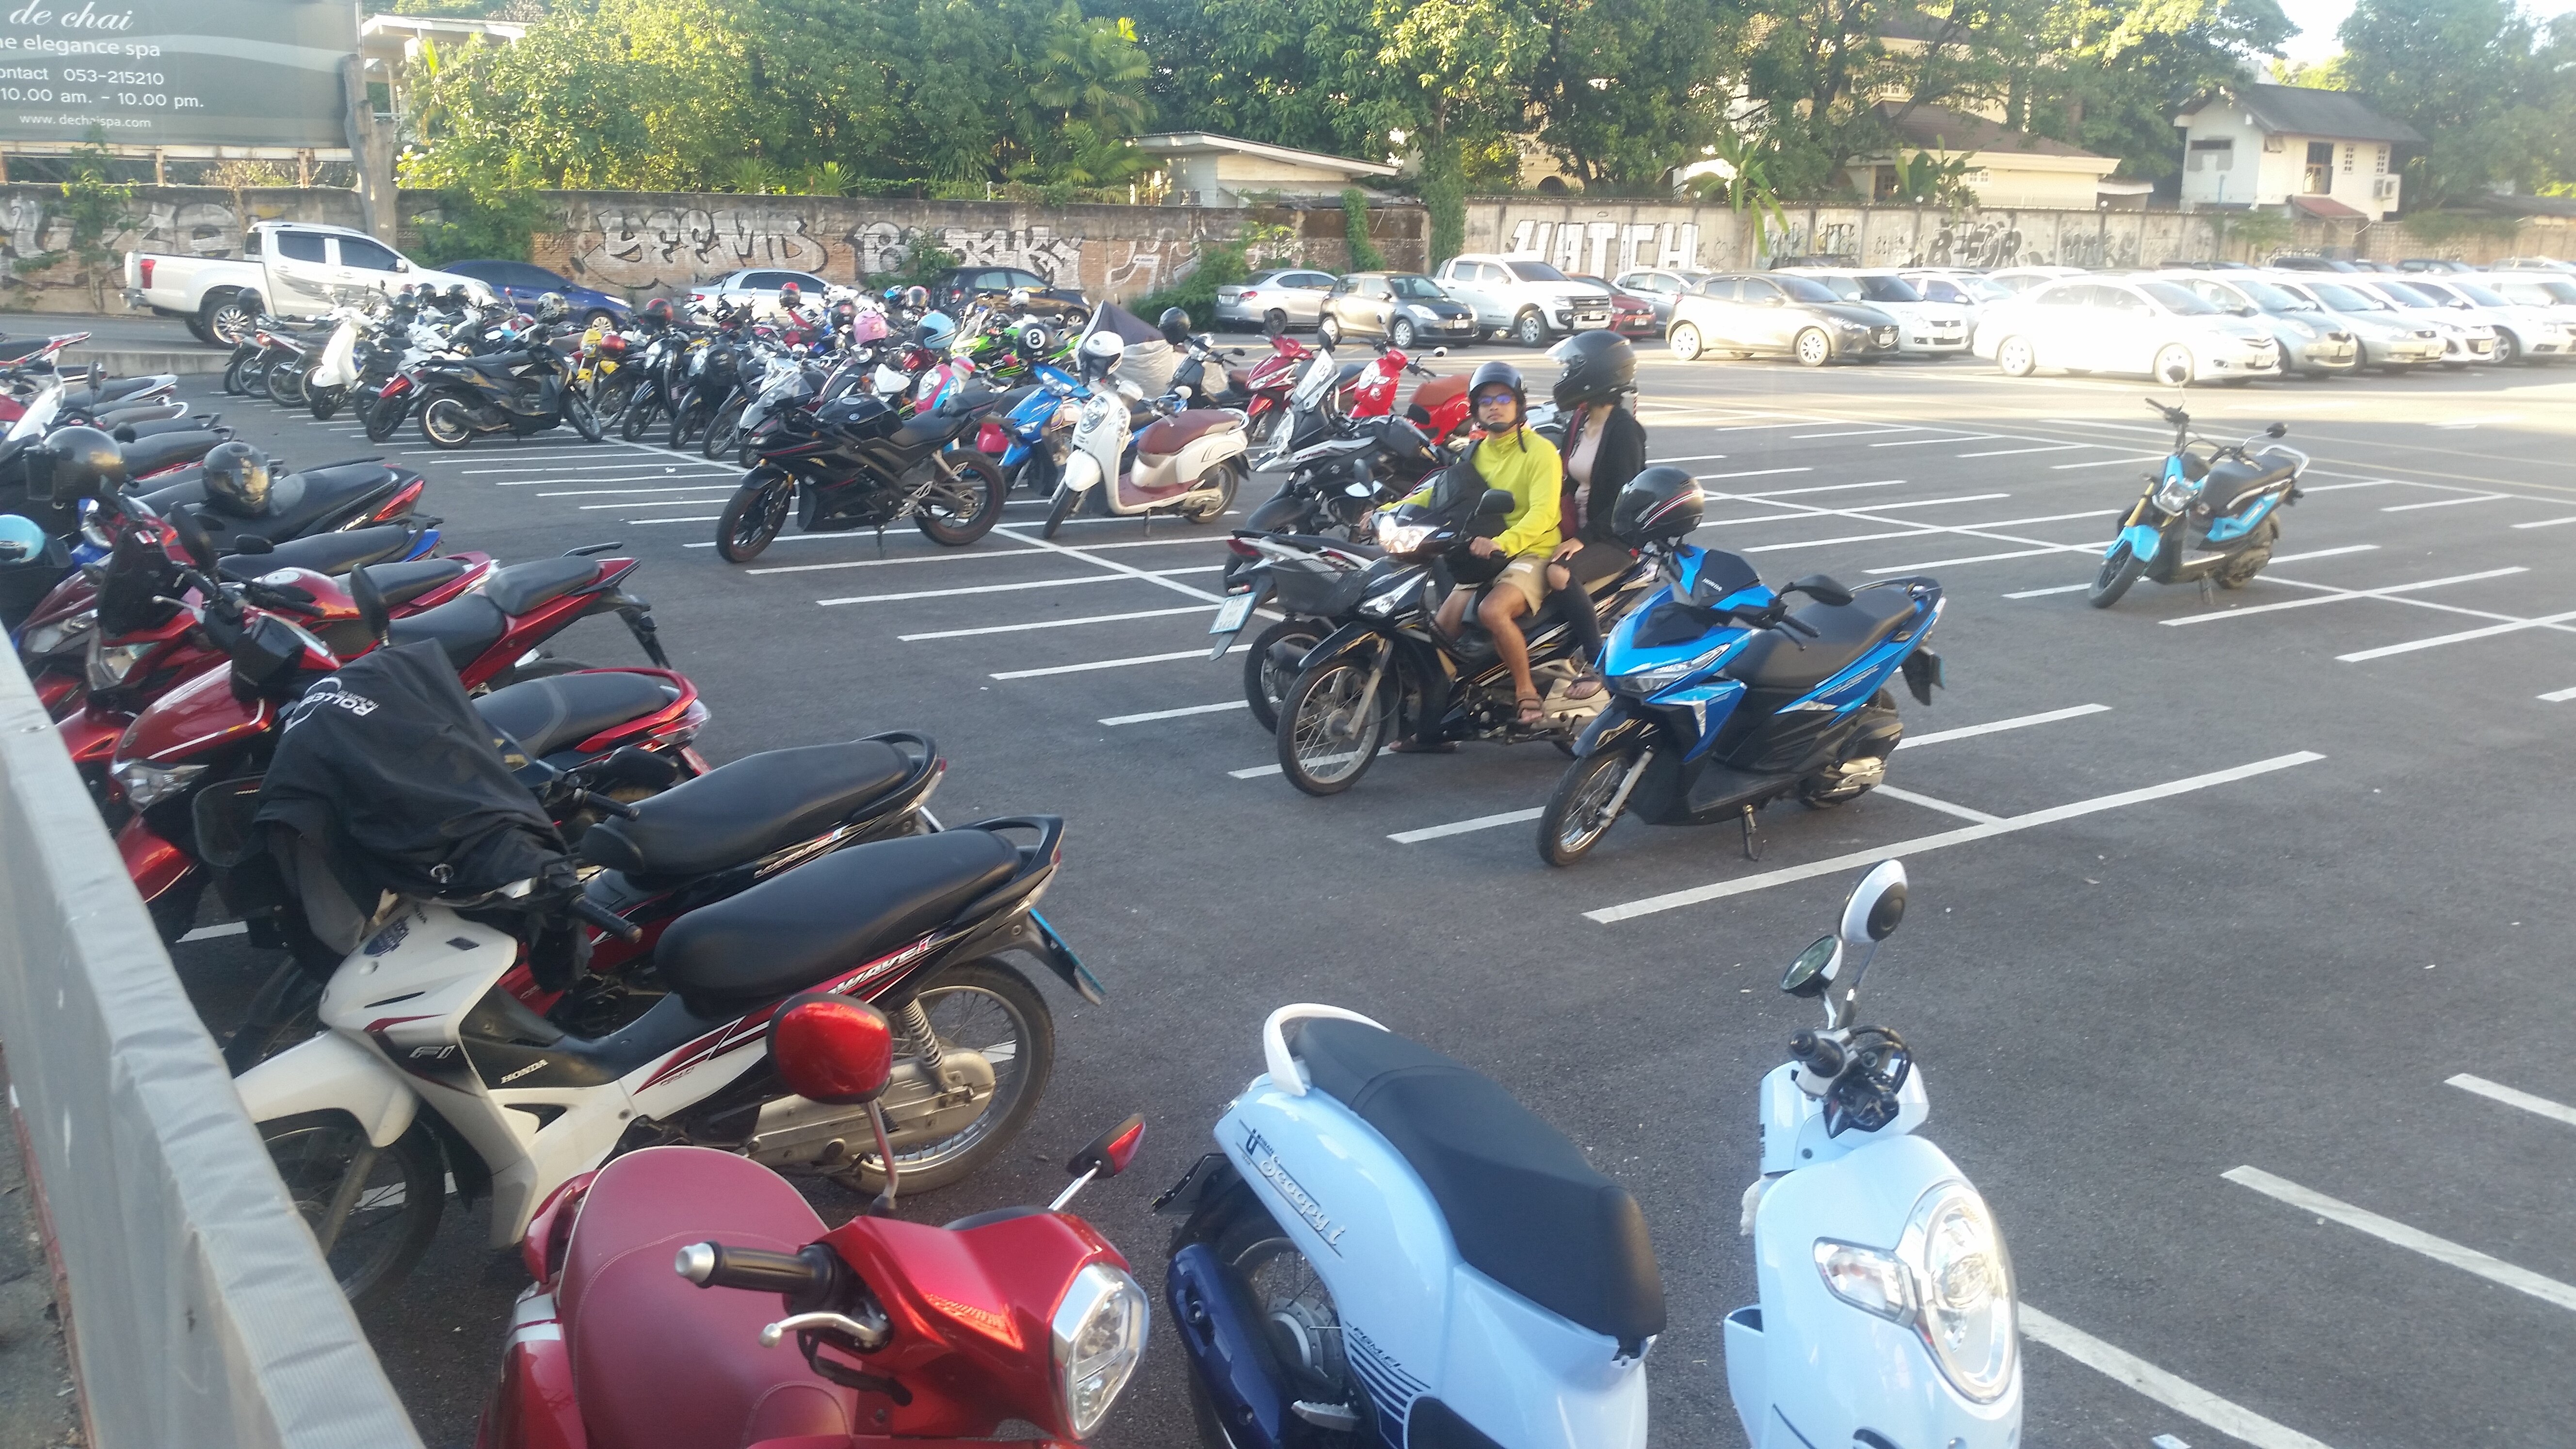 There are so many mopeds here that they have special parking spaces for them.